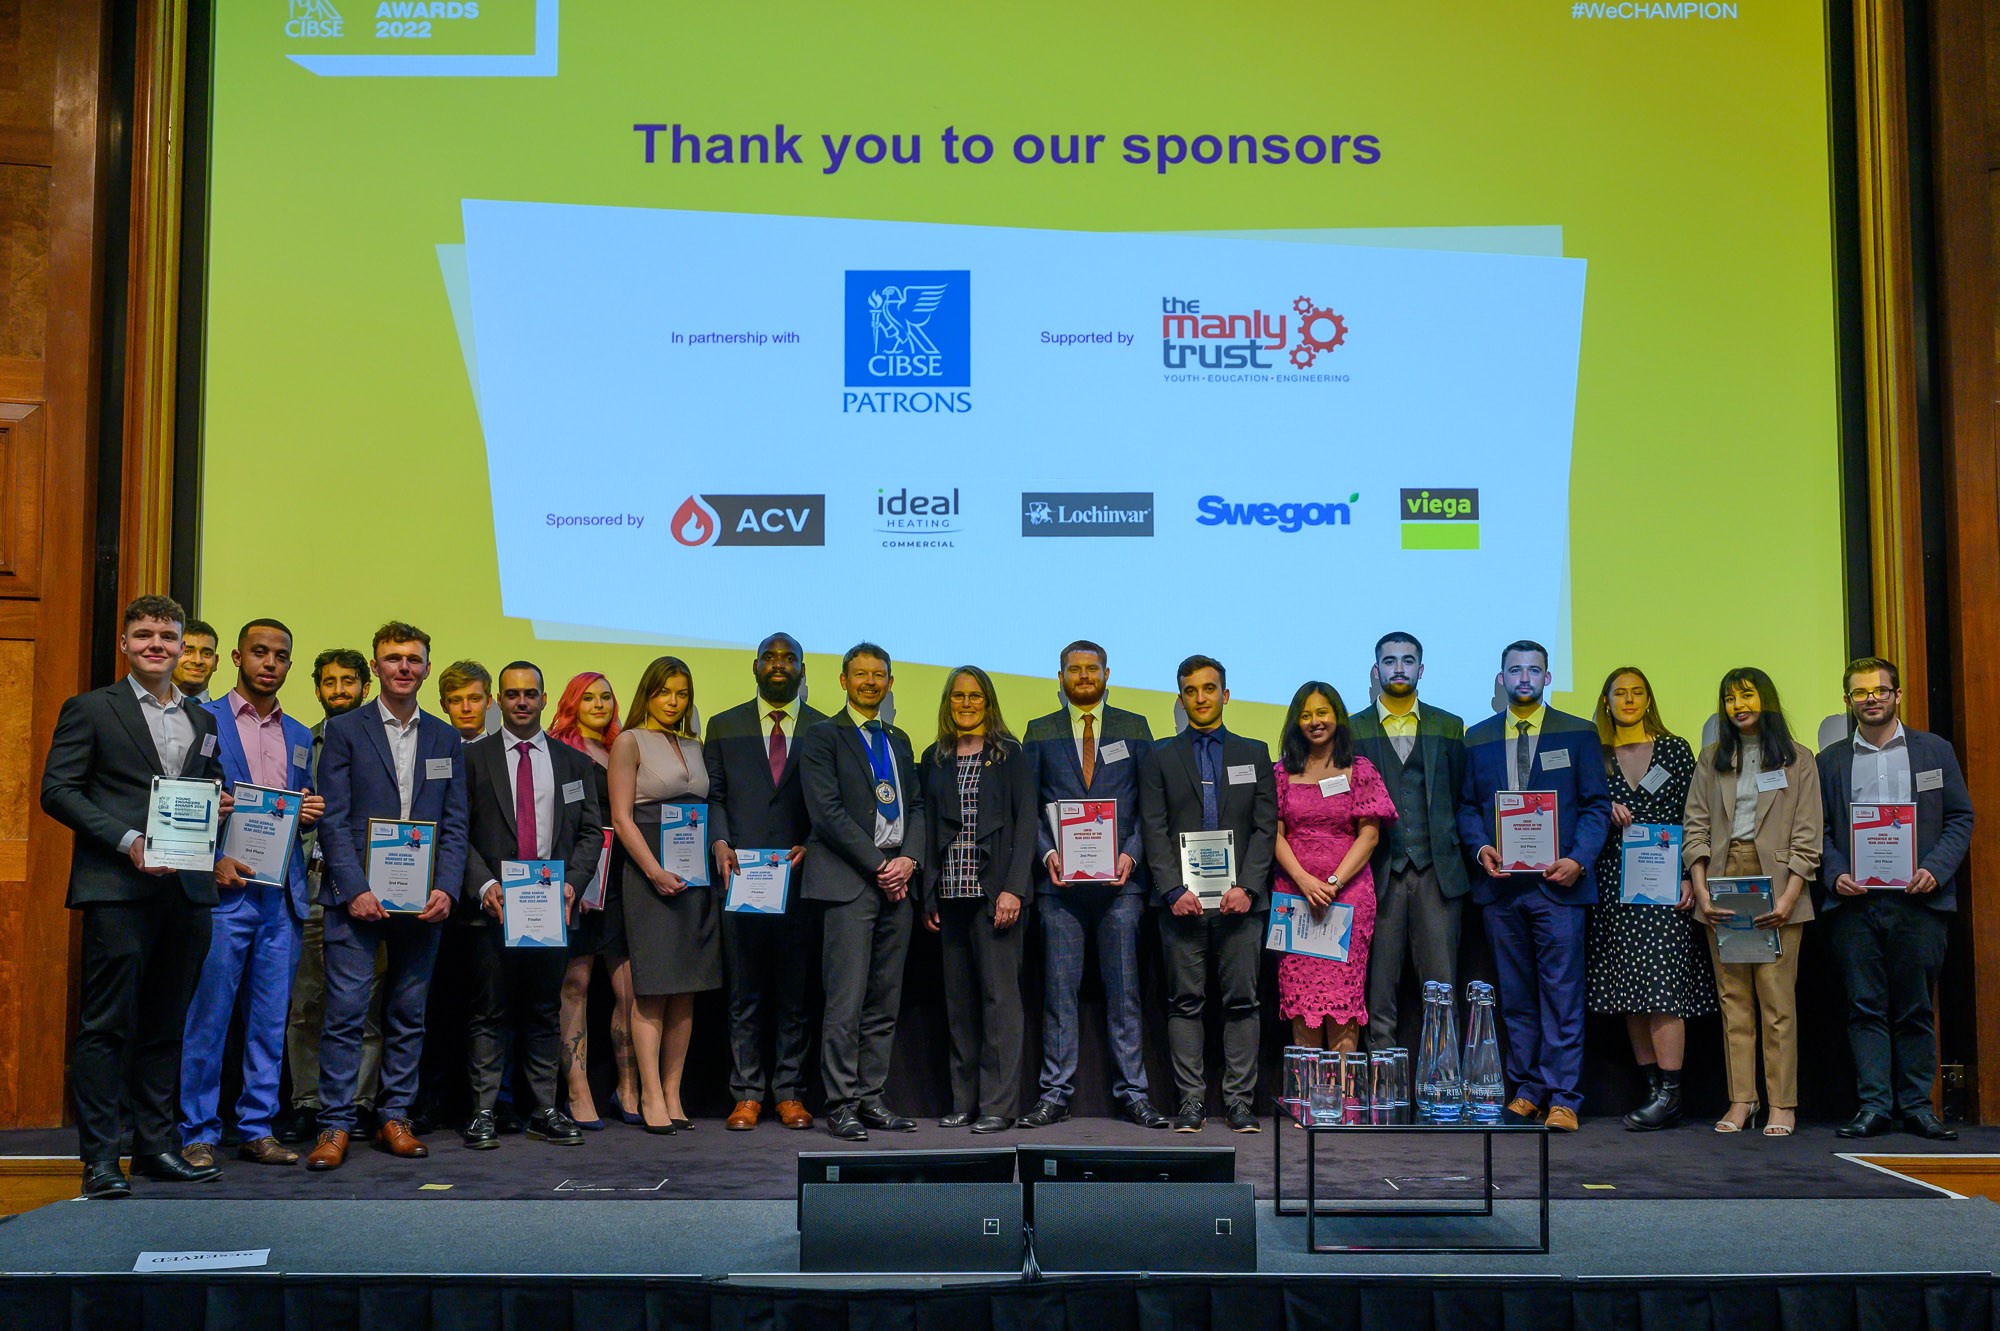 All shortlisted entrants for the CIBSE Young Engineers Awards 2022